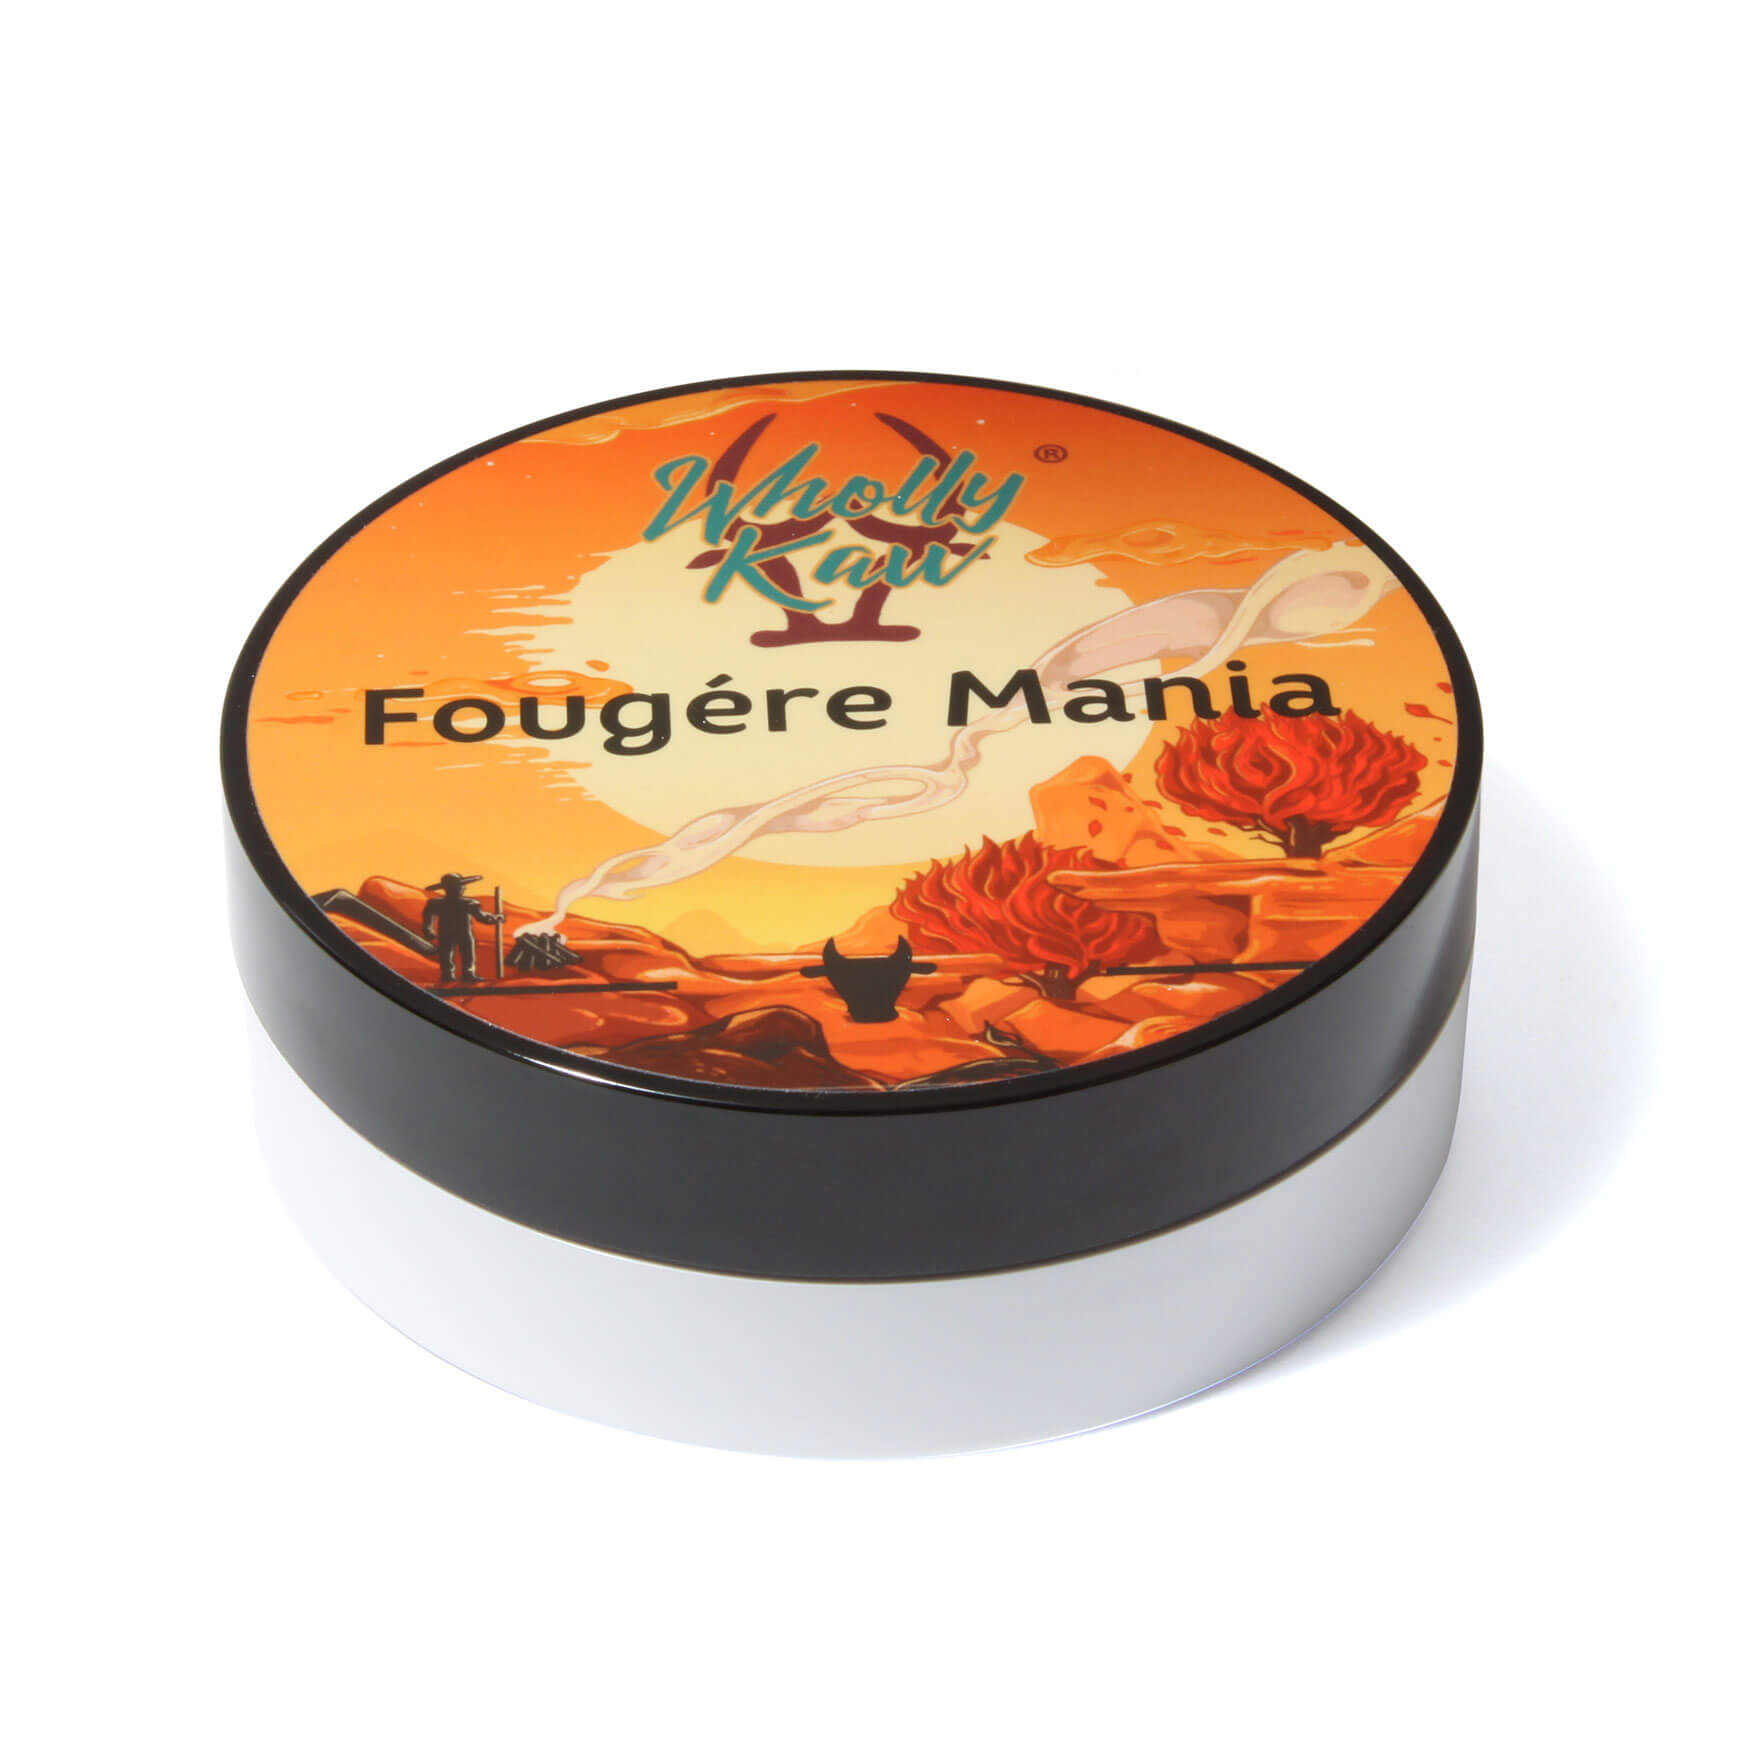 Wholly Kaw Fougere Mania Shaving Soap